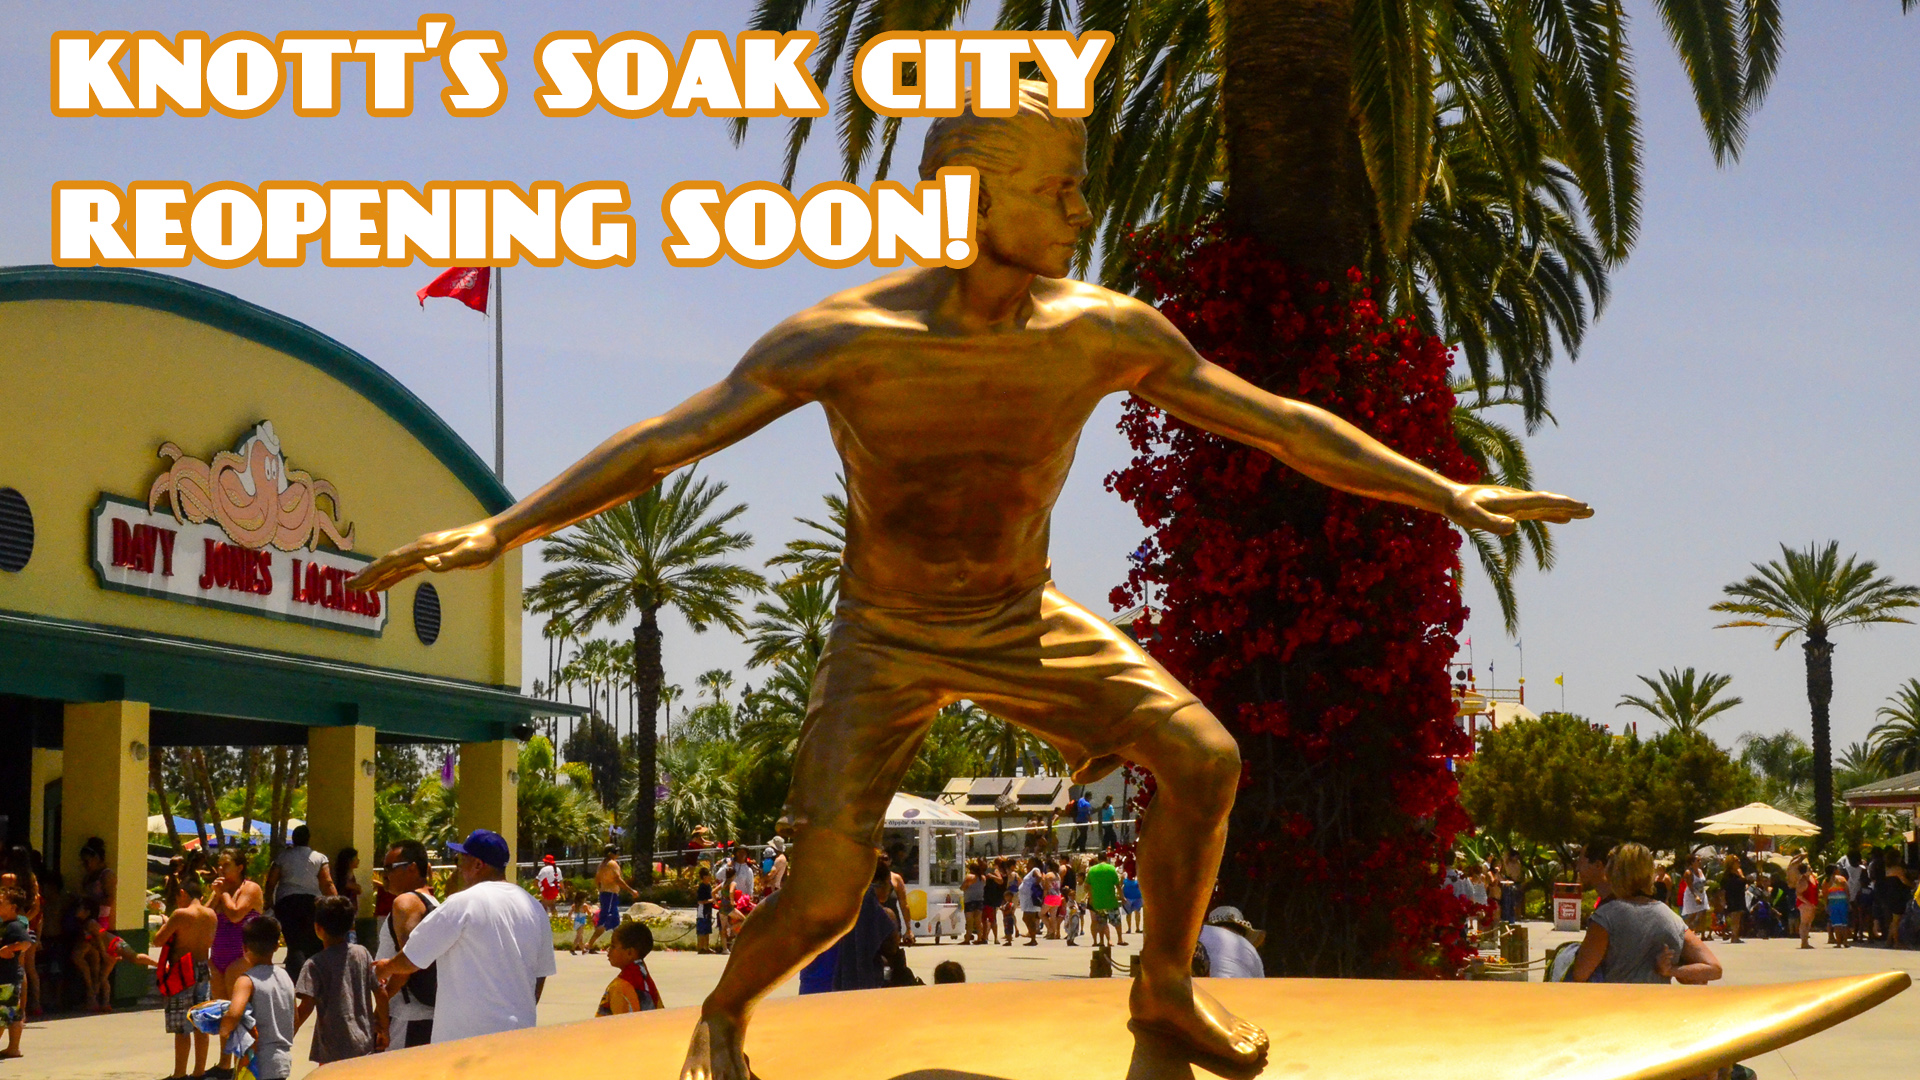 Knott’s Soak City to Reopen May 29 With Passholder Previews Days Before